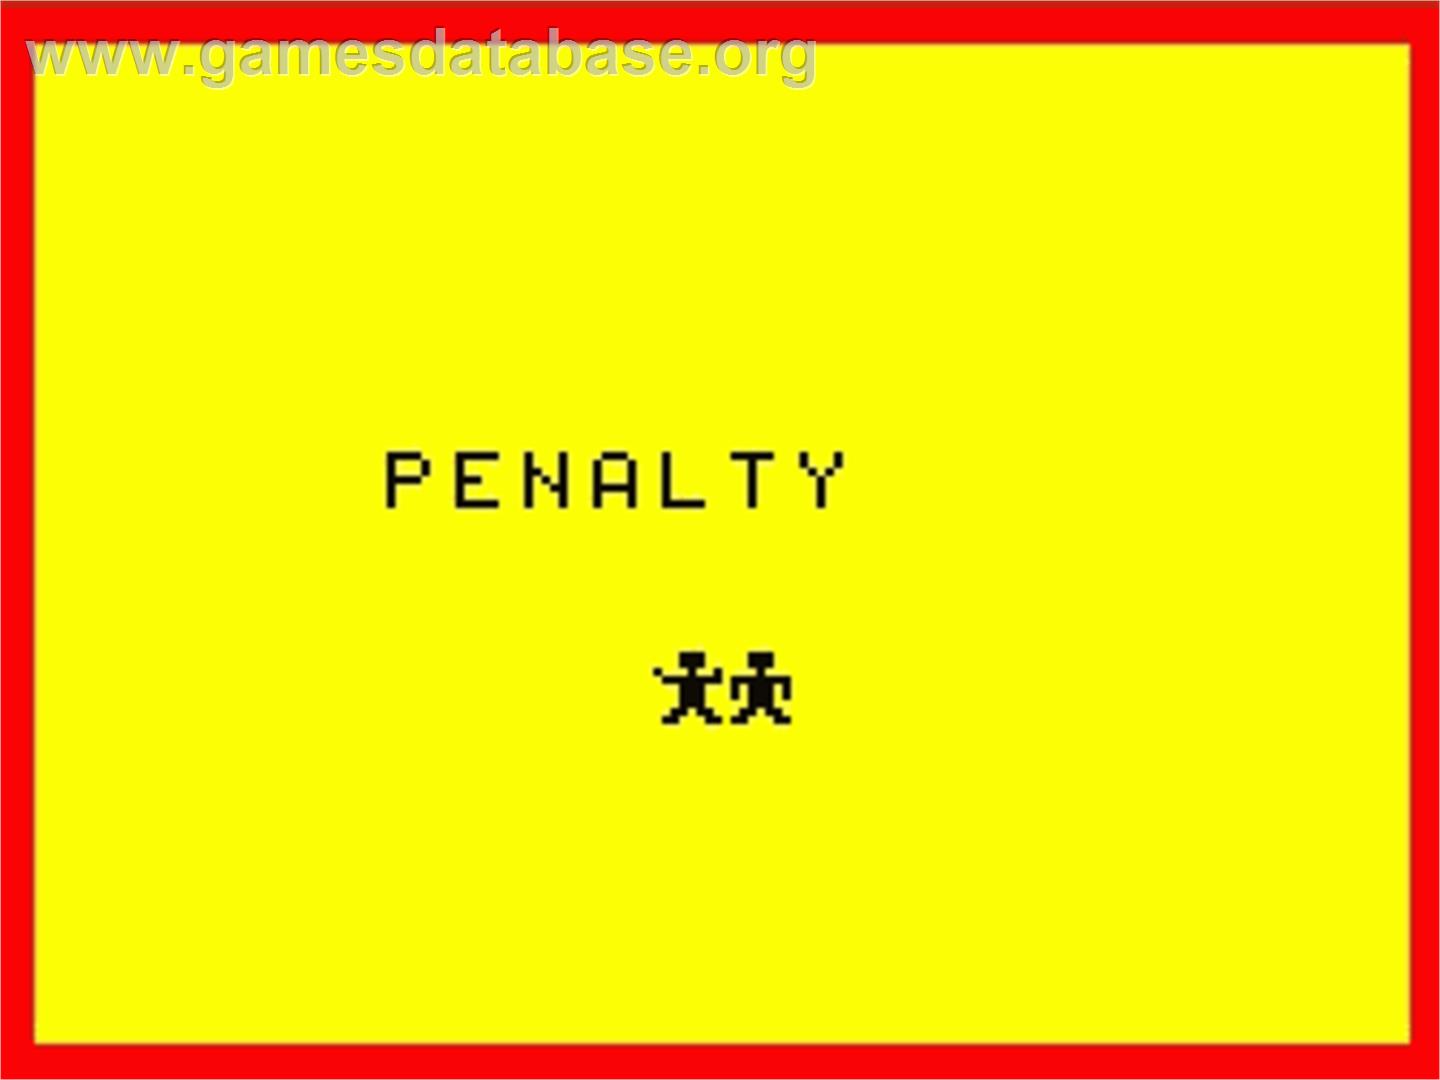 Penalty - Philips VG 5000 - Artwork - Title Screen